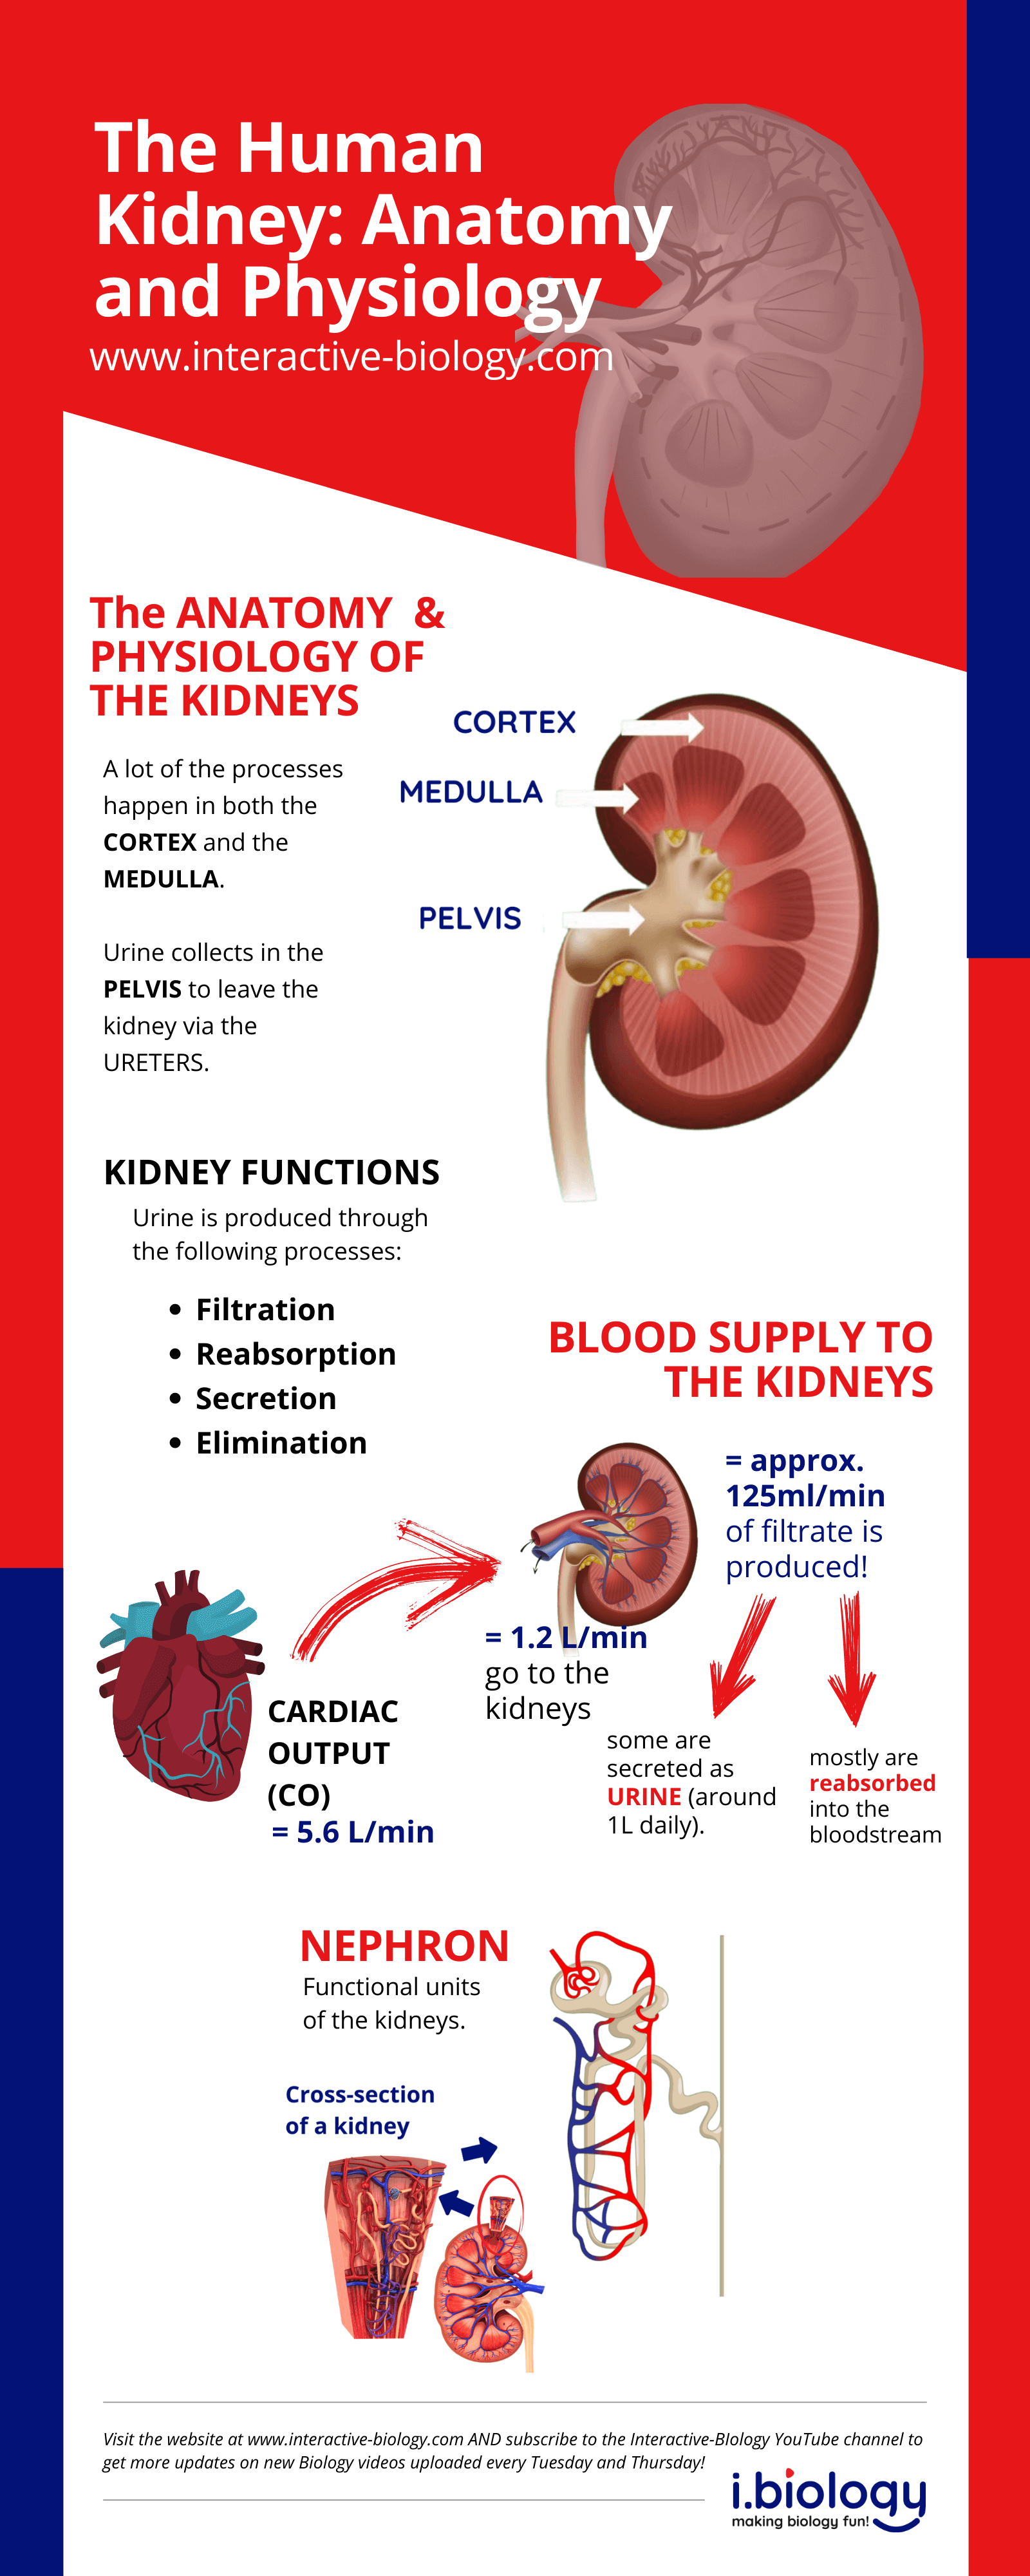 Infographic shows Kidney anatomy and physiology and a brief overview of how blood is supplied to the kidneys.